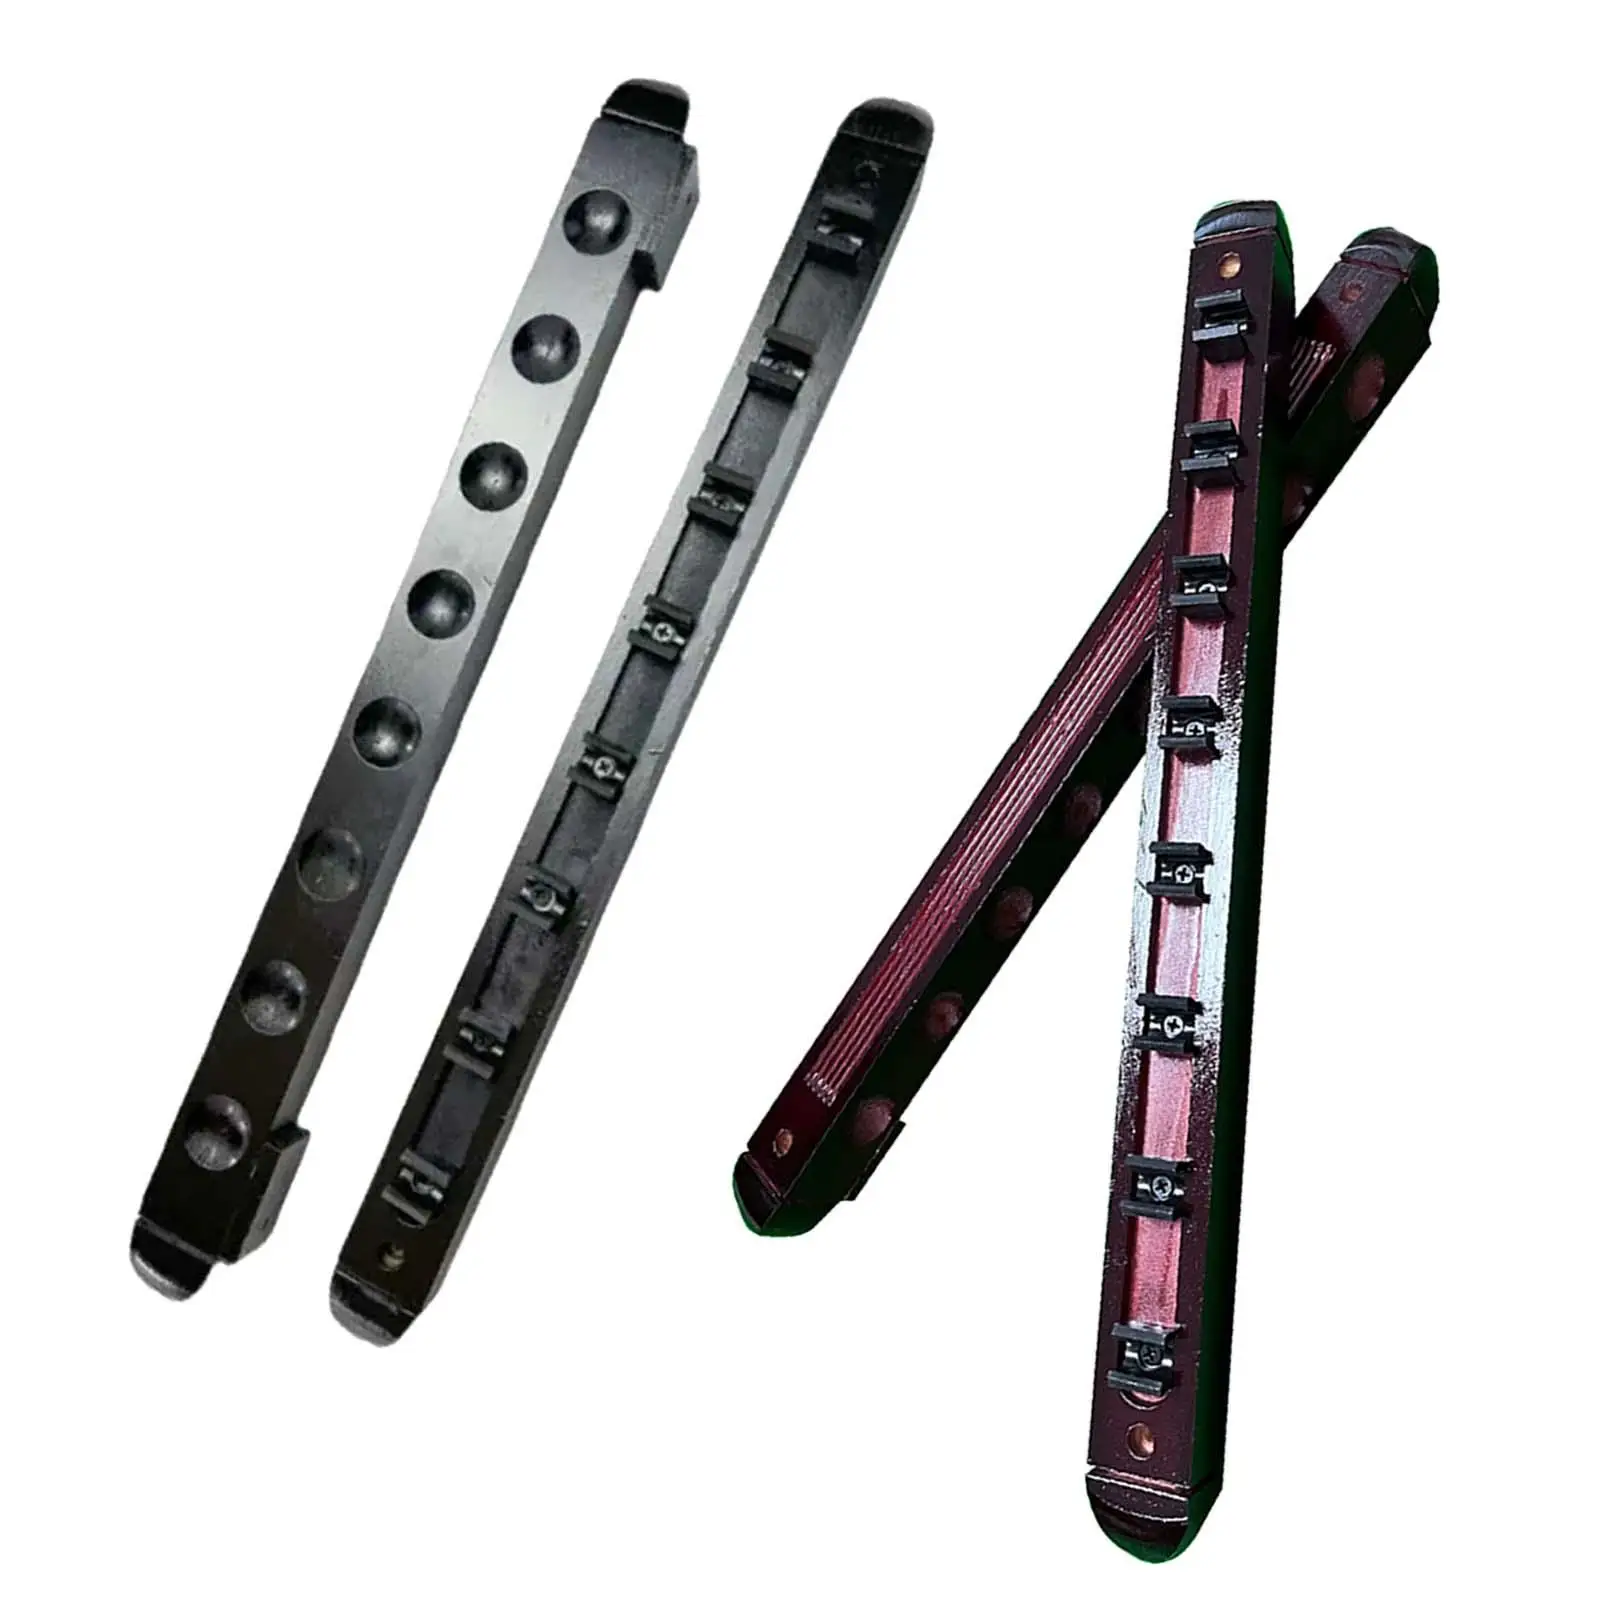 Pool Cue Holder Billiard Cue Wall Racks with Mounting Screws for Game Room Billiards Lovers Home Community Center Club